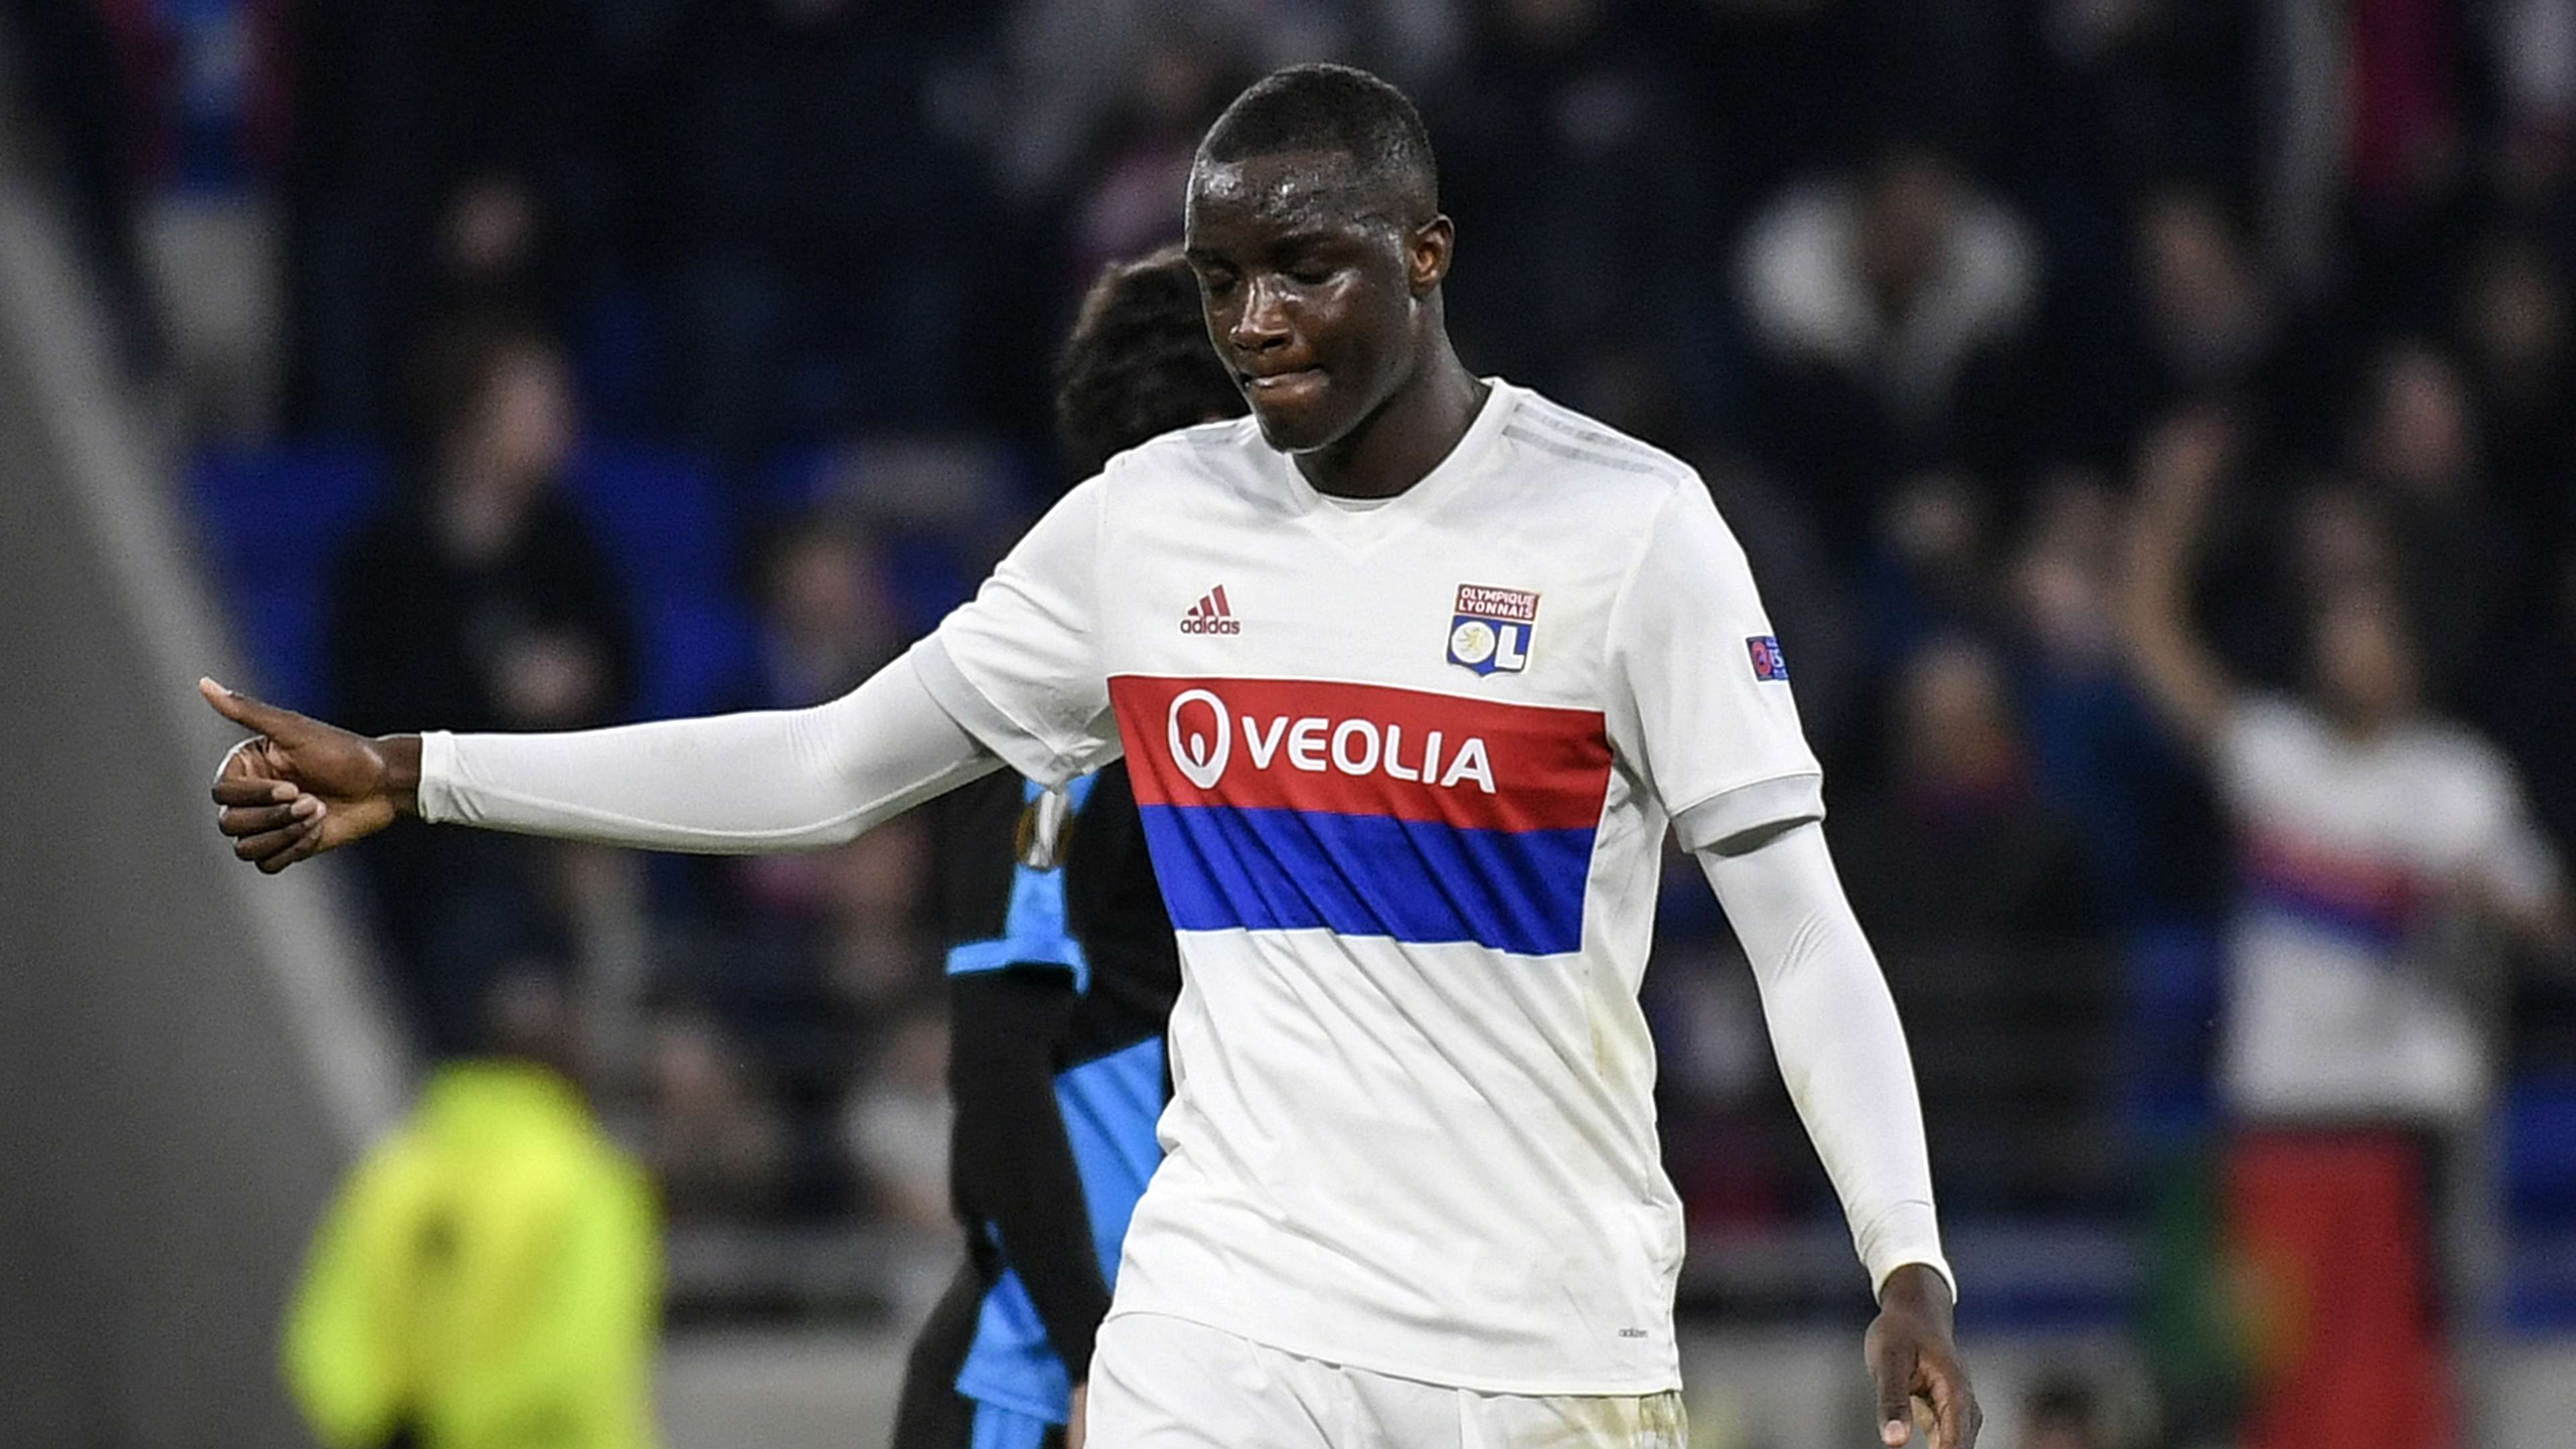 Mouctar Diakhaby Olympique Lyon